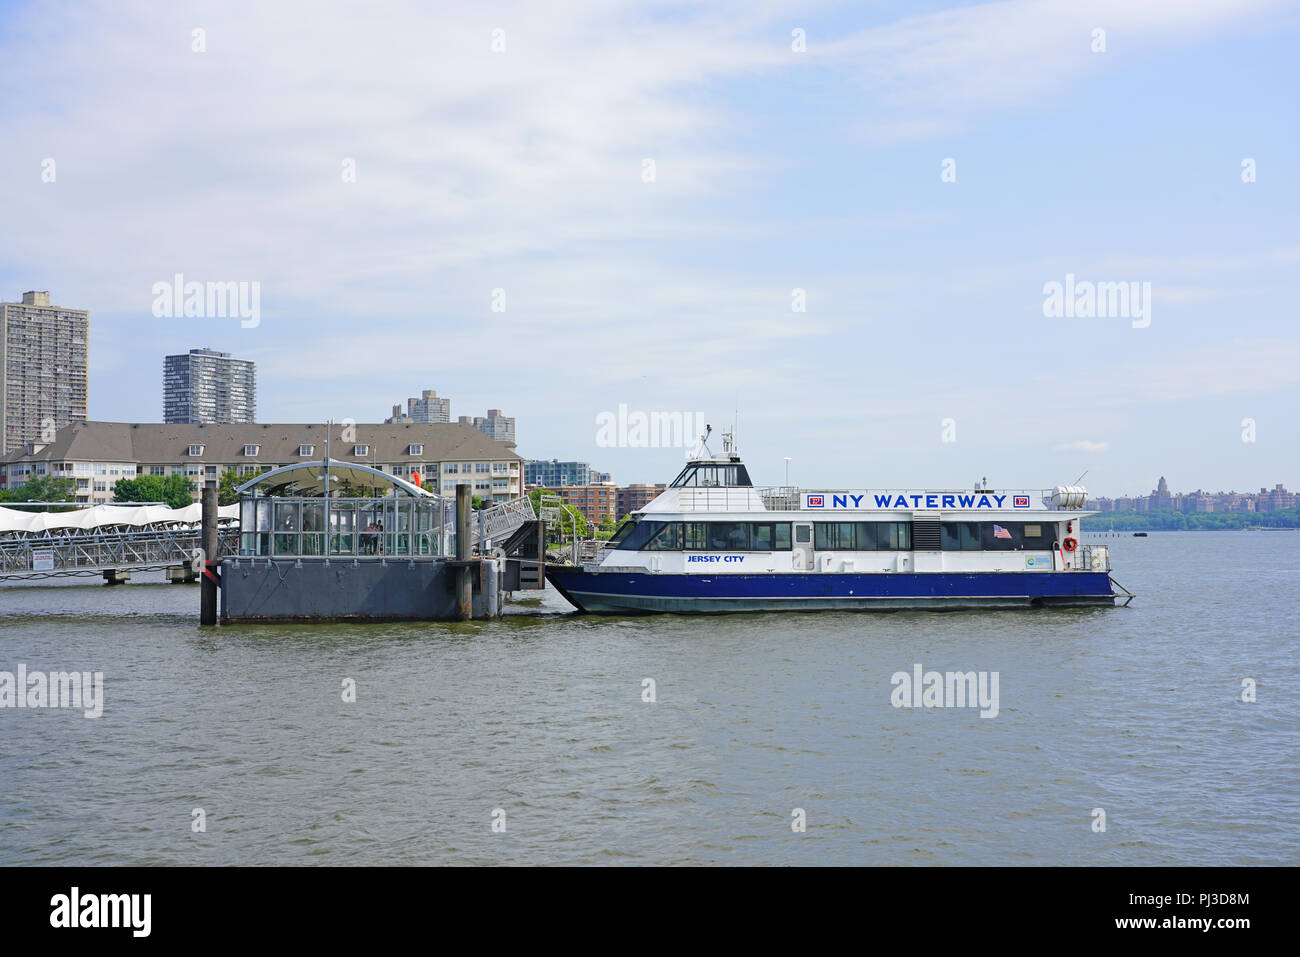 view of the ny waterway ferry terminal at port imperial in weehawken